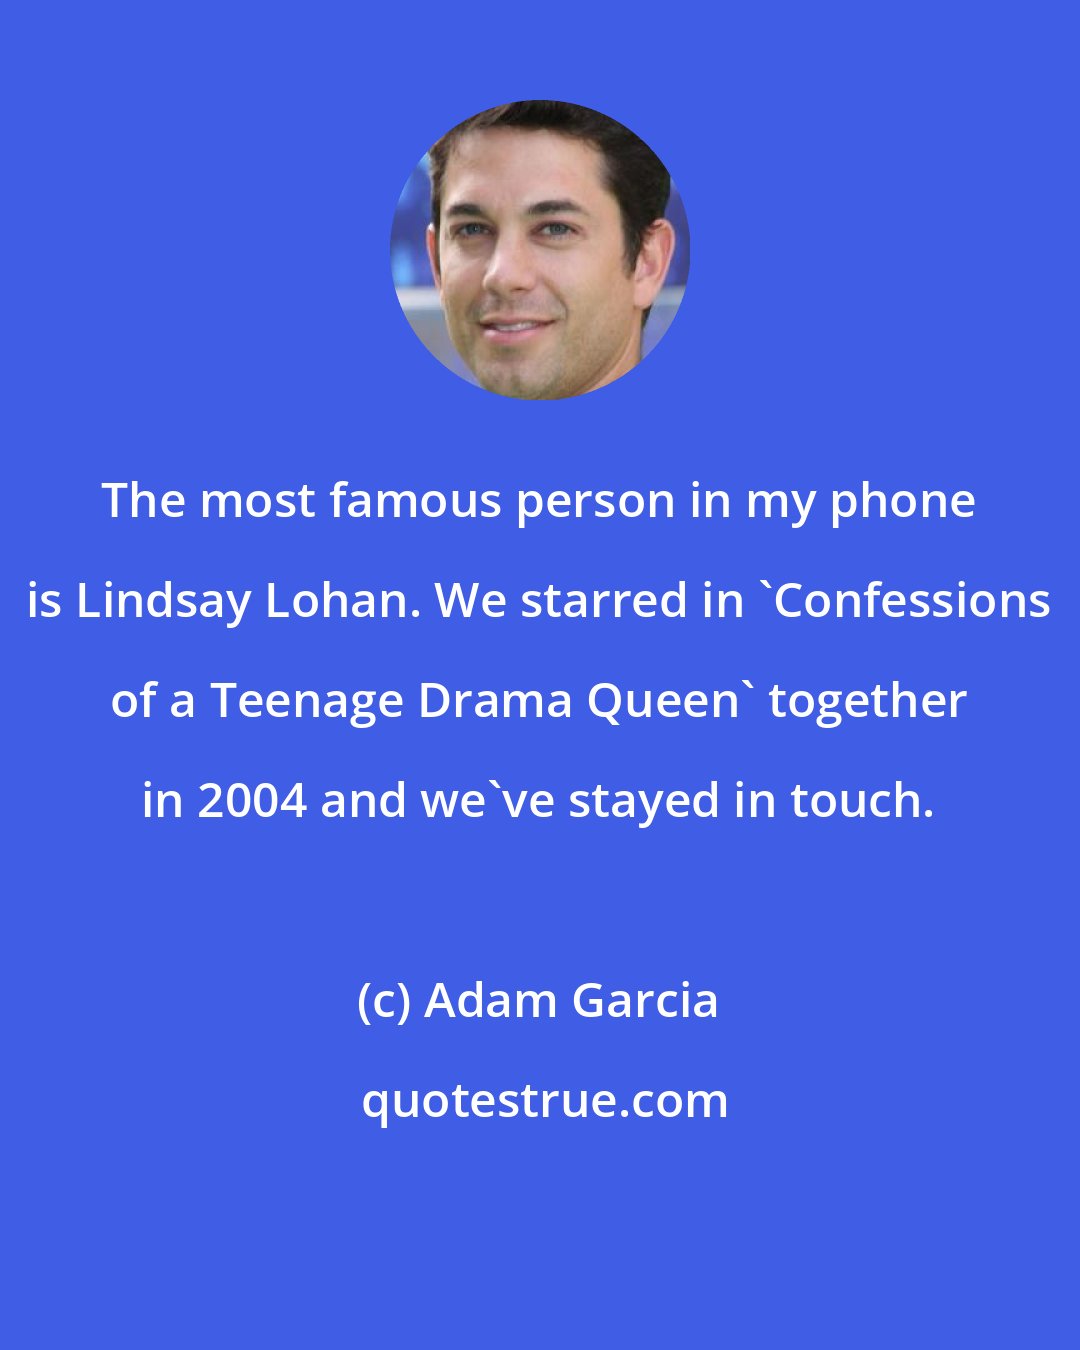 Adam Garcia: The most famous person in my phone is Lindsay Lohan. We starred in 'Confessions of a Teenage Drama Queen' together in 2004 and we've stayed in touch.